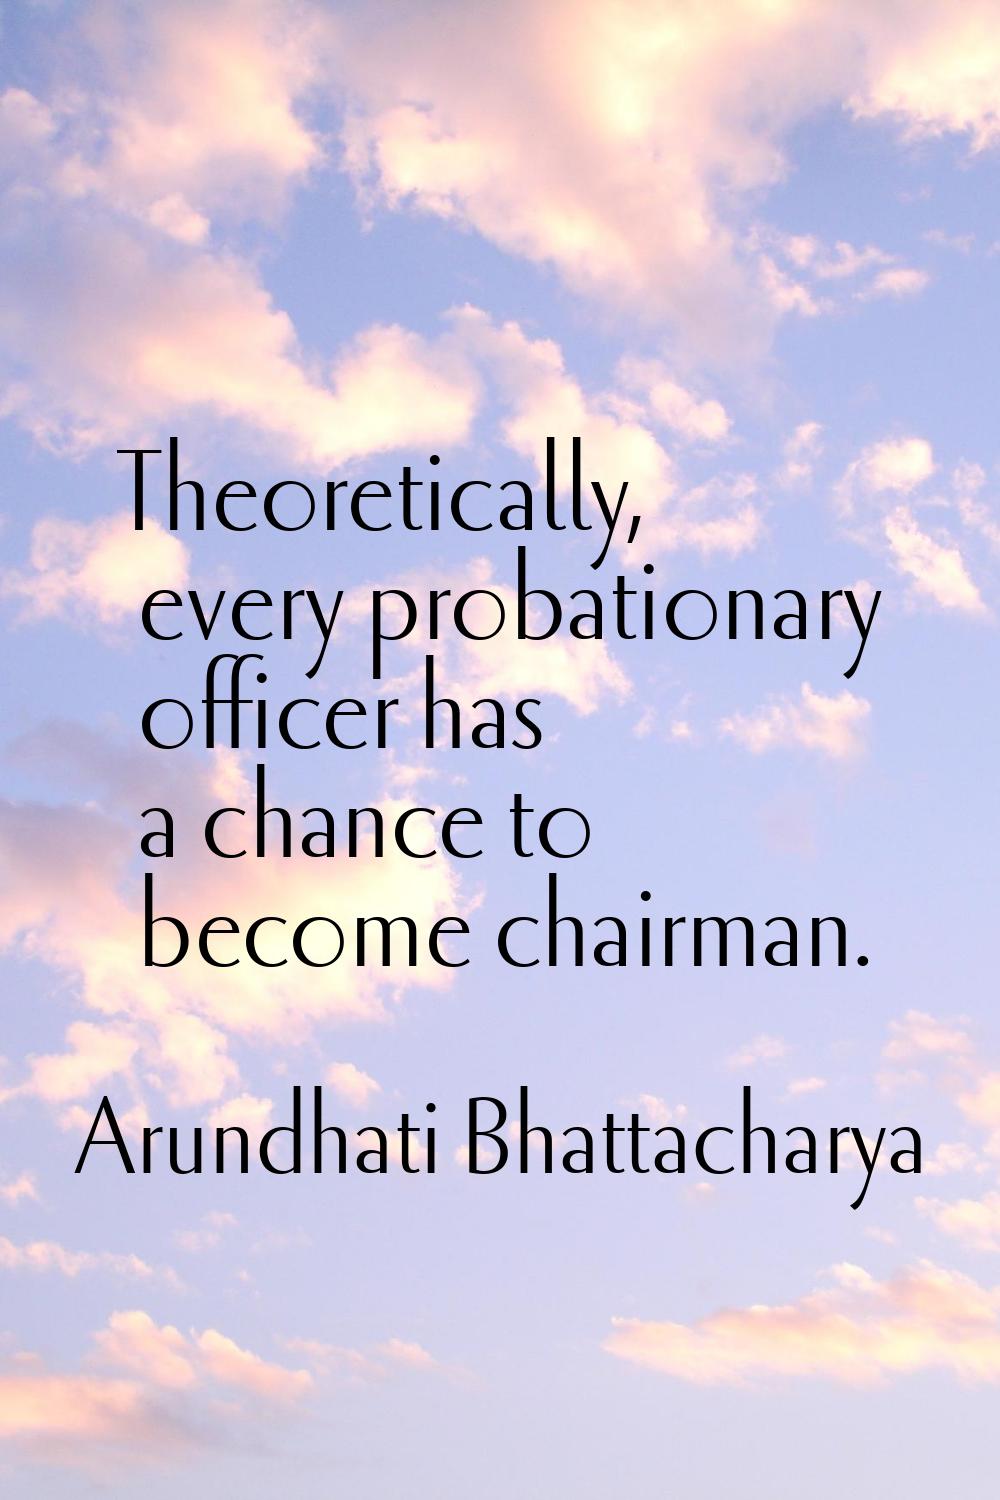 Theoretically, every probationary officer has a chance to become chairman.